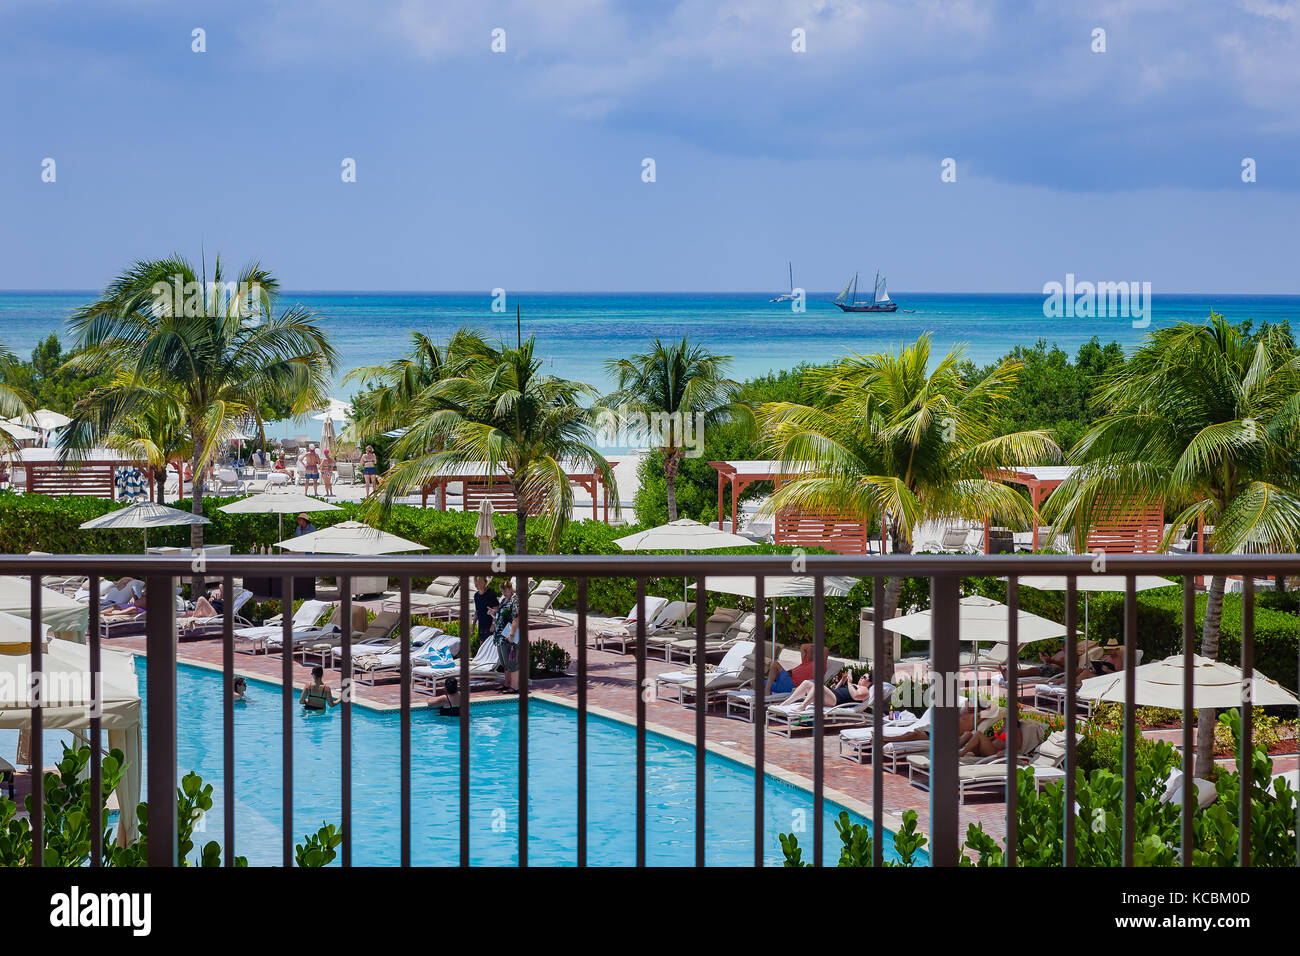 Aruba - A view of the South Caribbean Sea from Palm Beach on the Island of Aruba. Foreground: Coconut Palms and a  section of the Ritz-Carlton Hotel Stock Photo